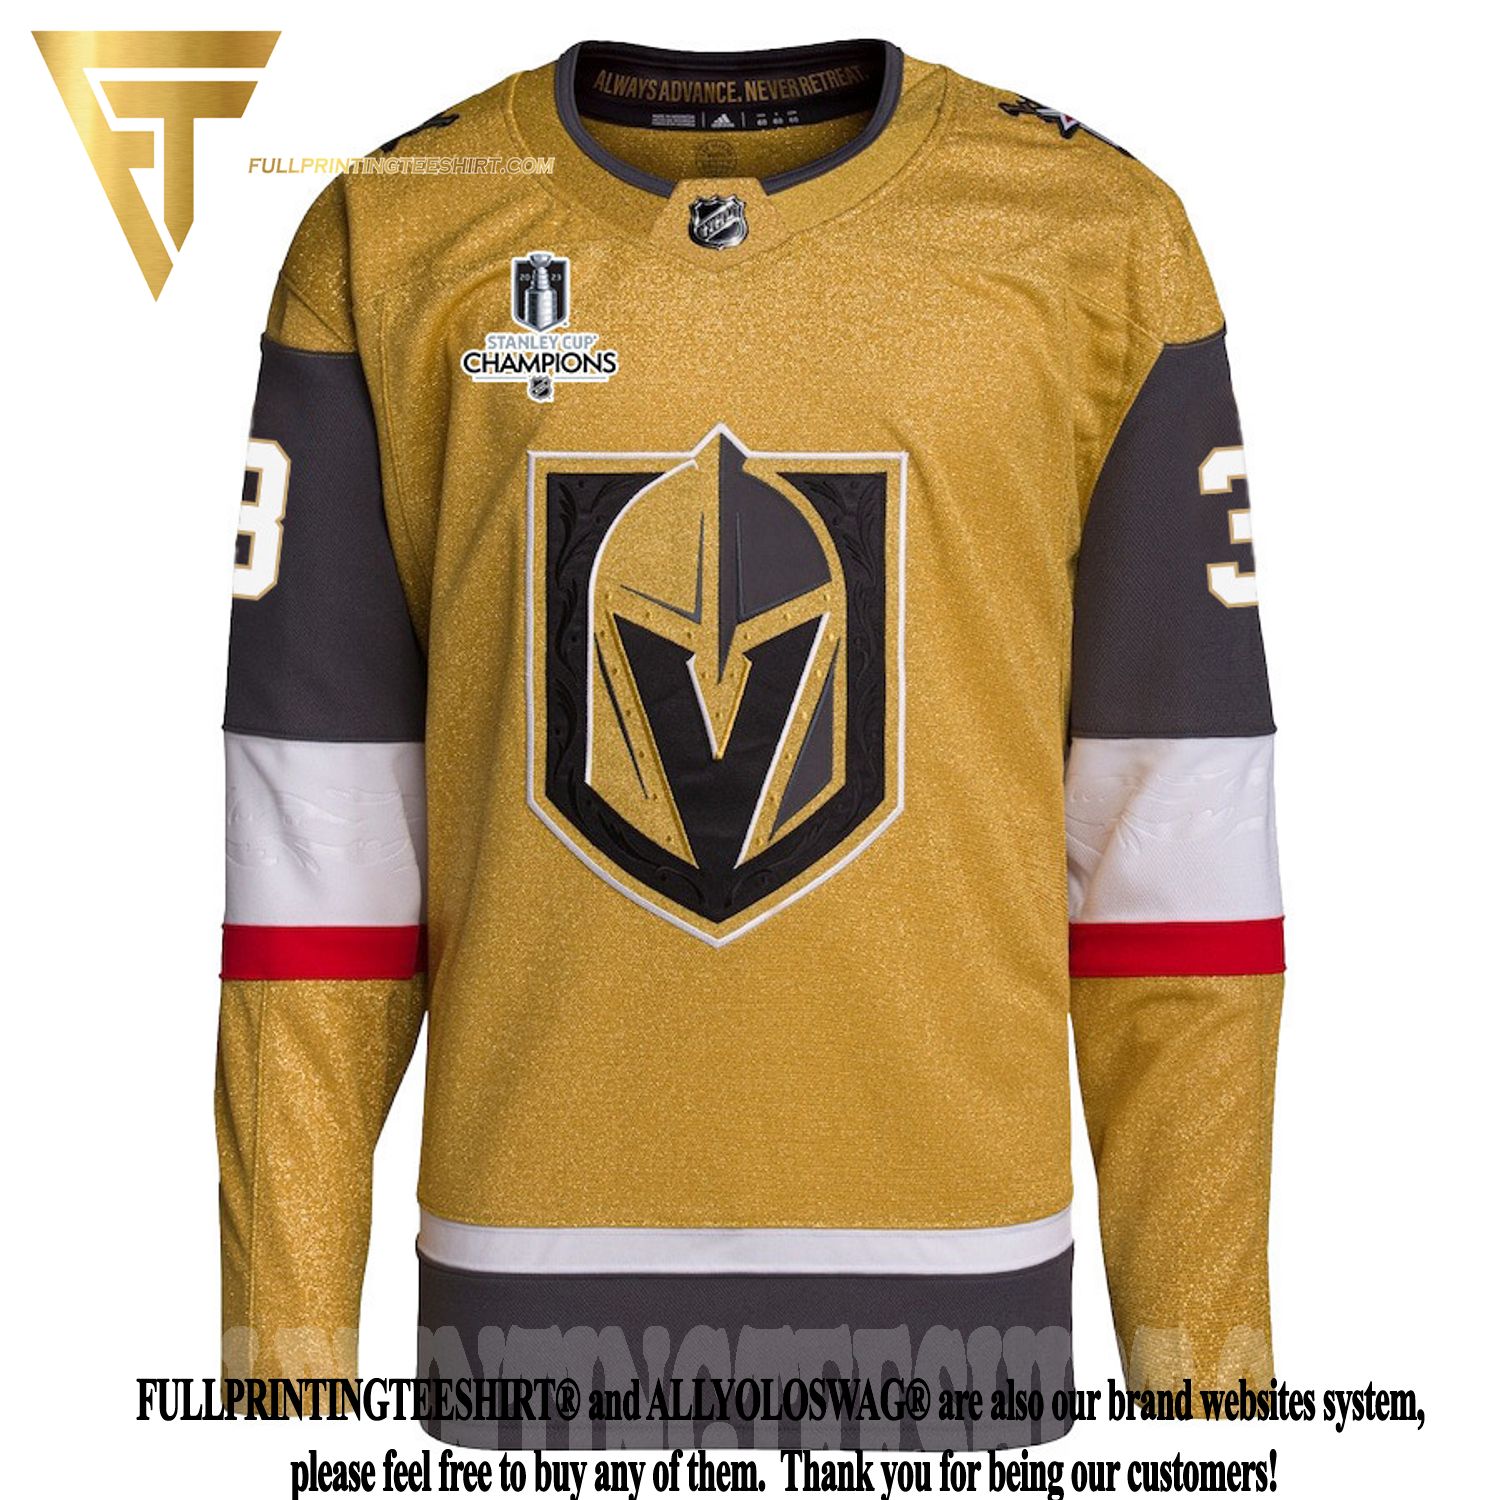 Mickey Mouse Vegas Golden Knights 2023 champion shirt, hoodie